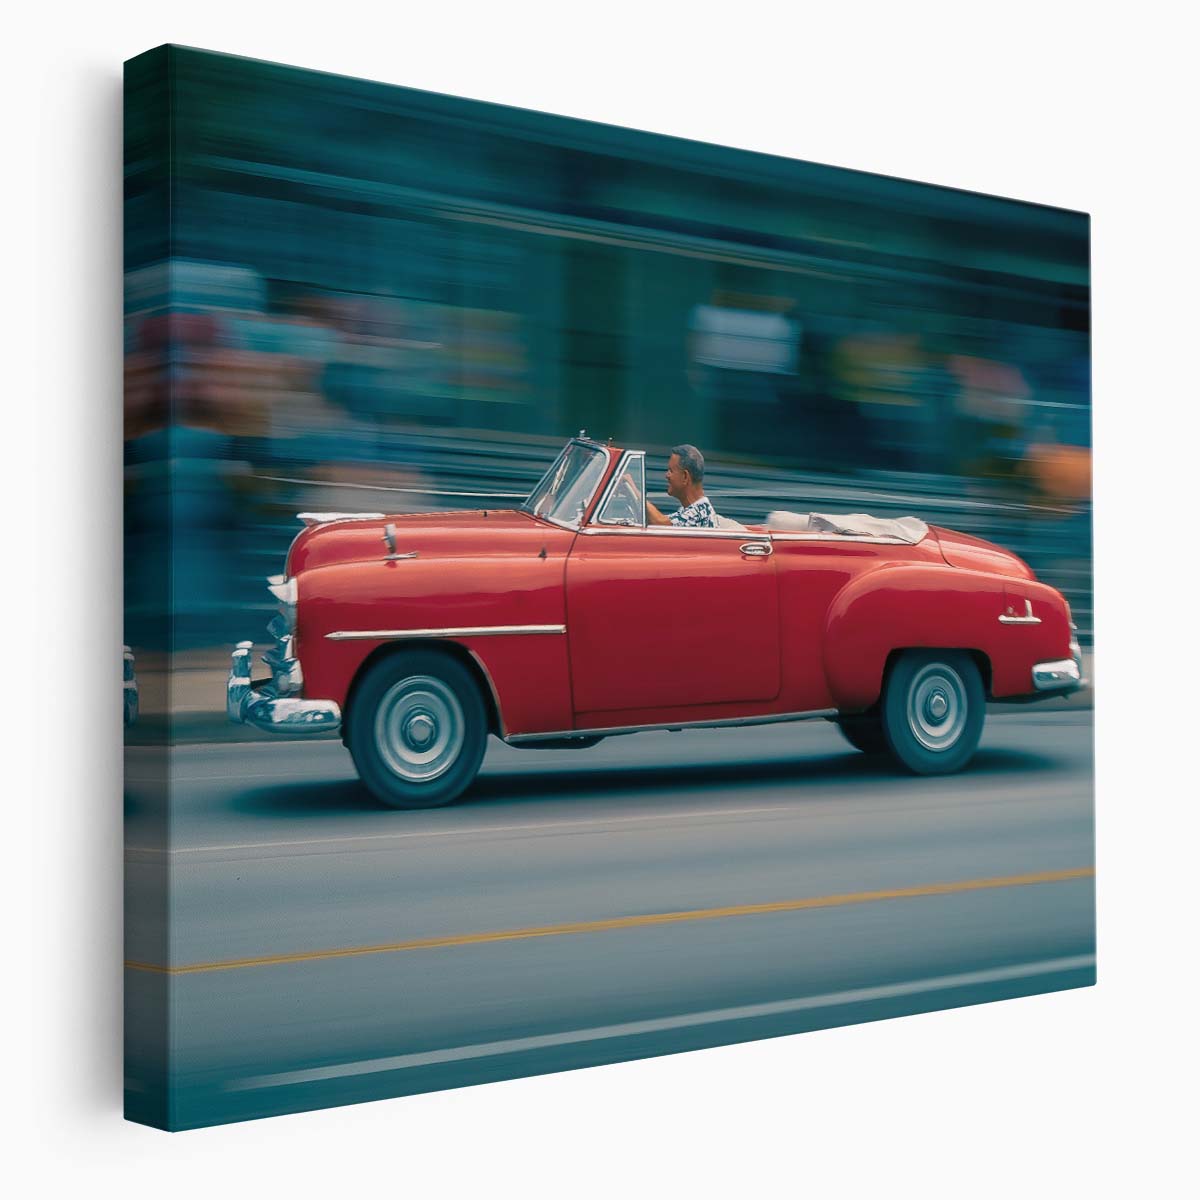 Classic Havana Car in Motion Blur Street Wall Art by Luxuriance Designs. Made in USA.